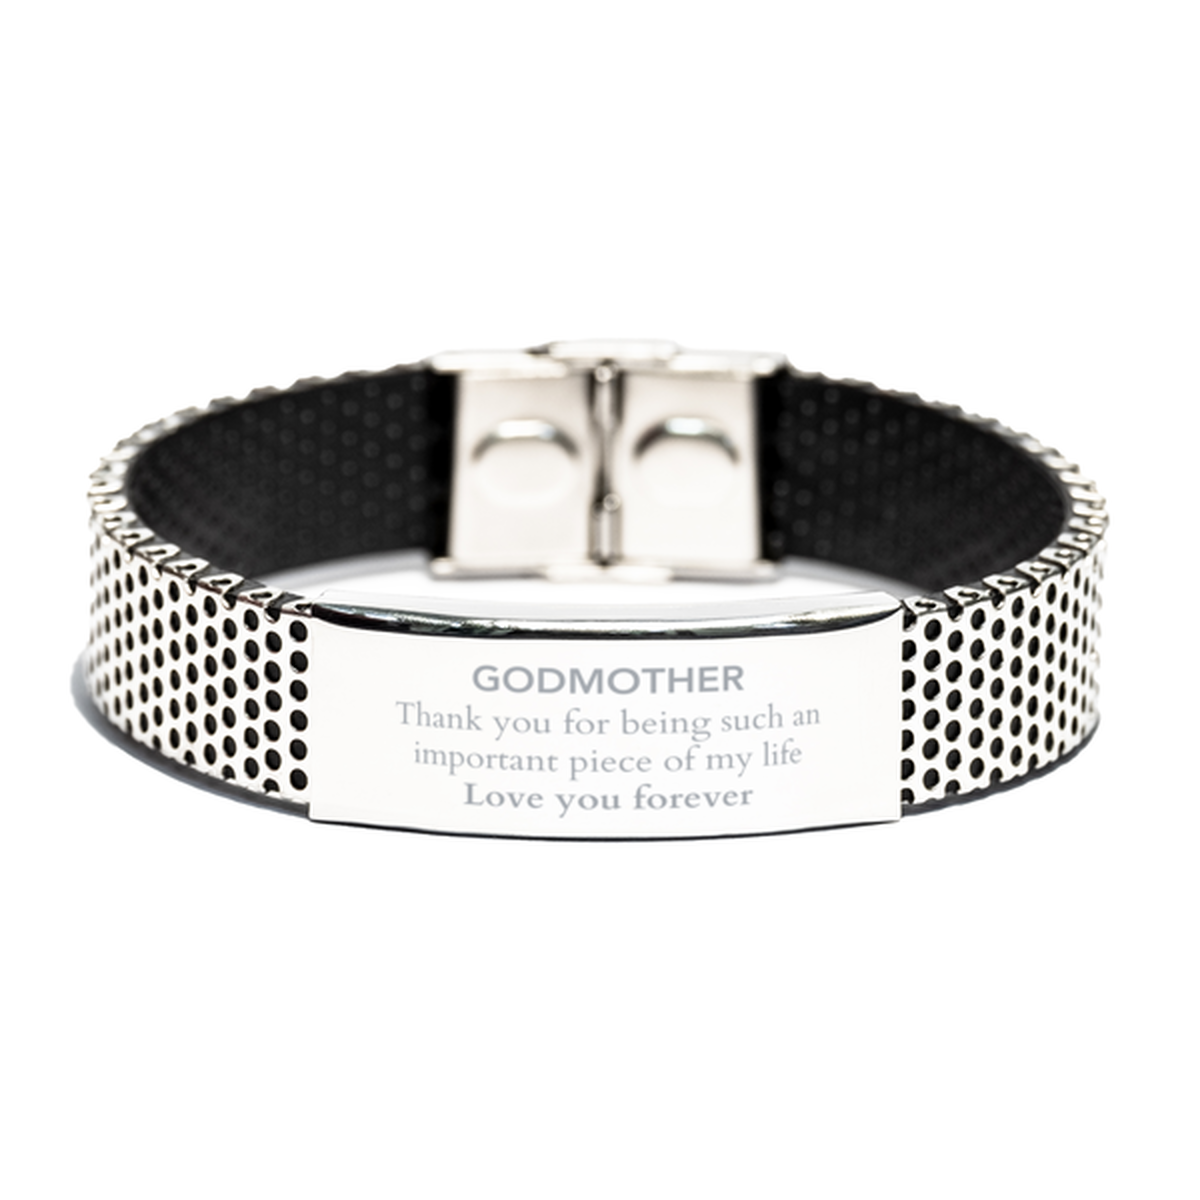 Appropriate Godmother Stainless Steel Bracelet Epic Birthday Gifts for Godmother Thank you for being such an important piece of my life Godmother Christmas Mothers Fathers Day